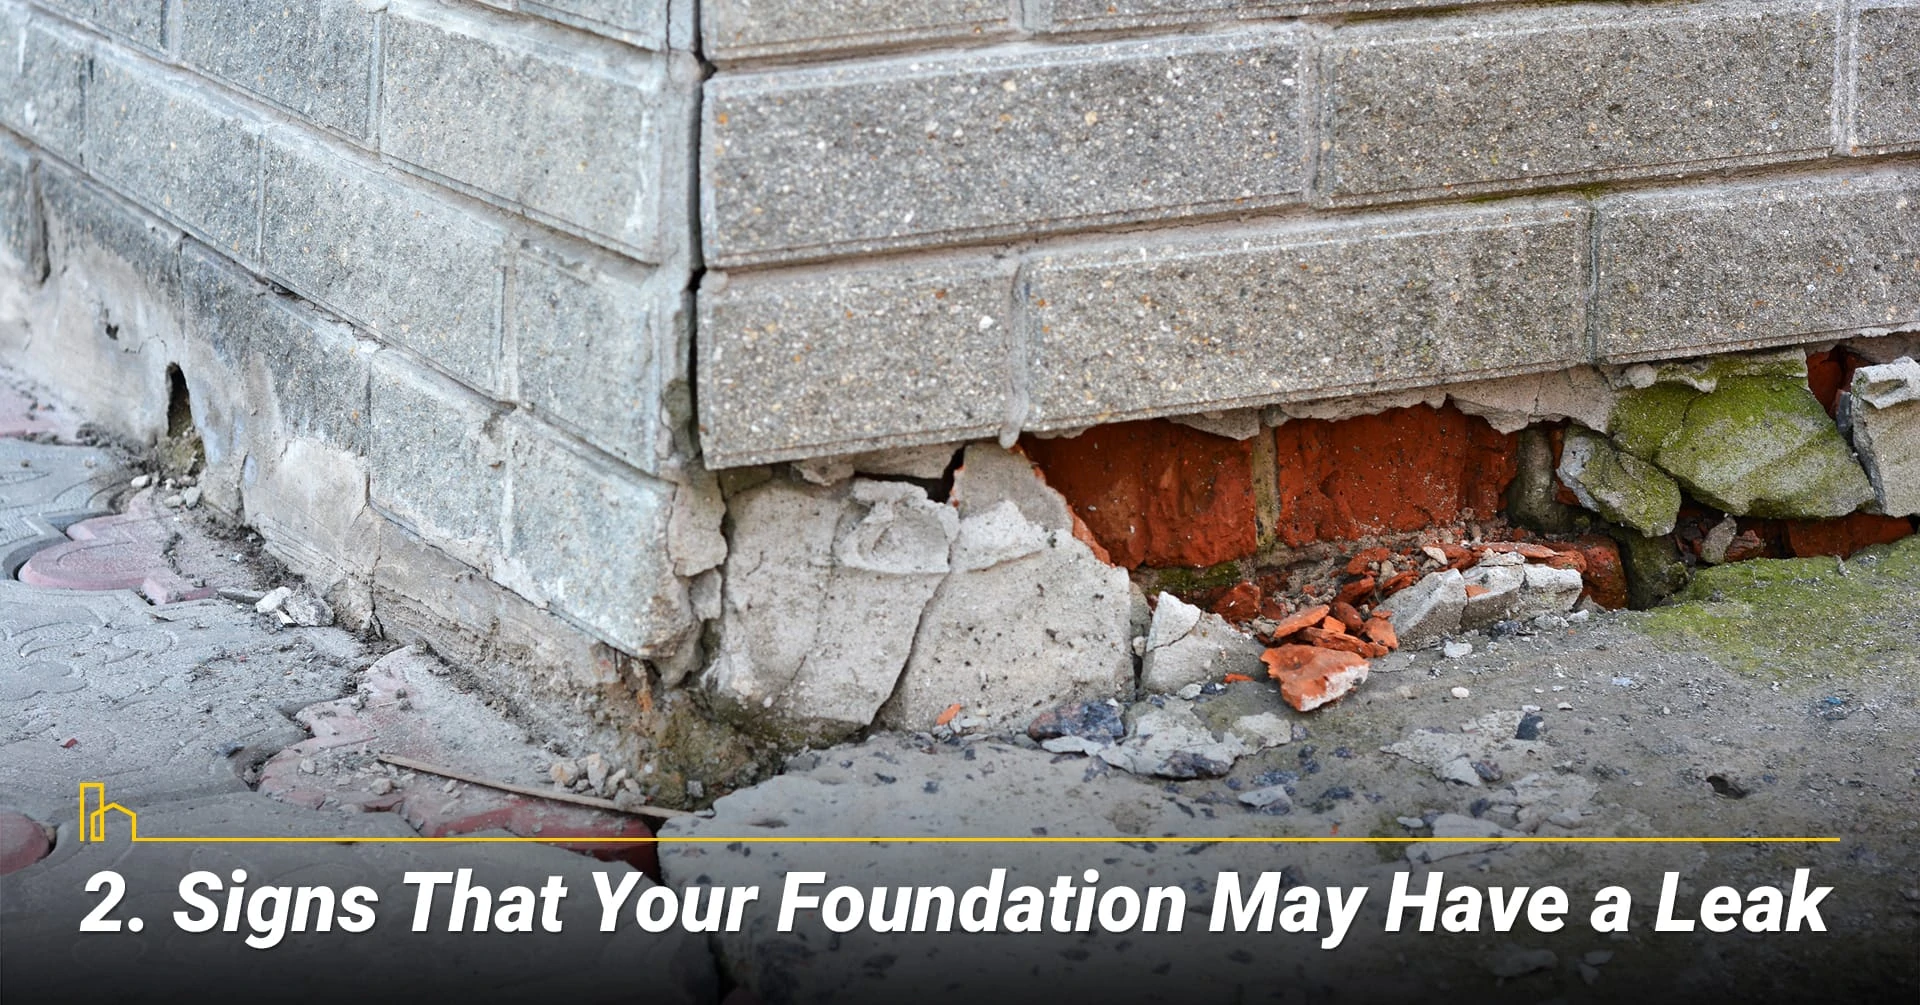 Signs That Your Foundation May Have a Leak, deteriorated external walls